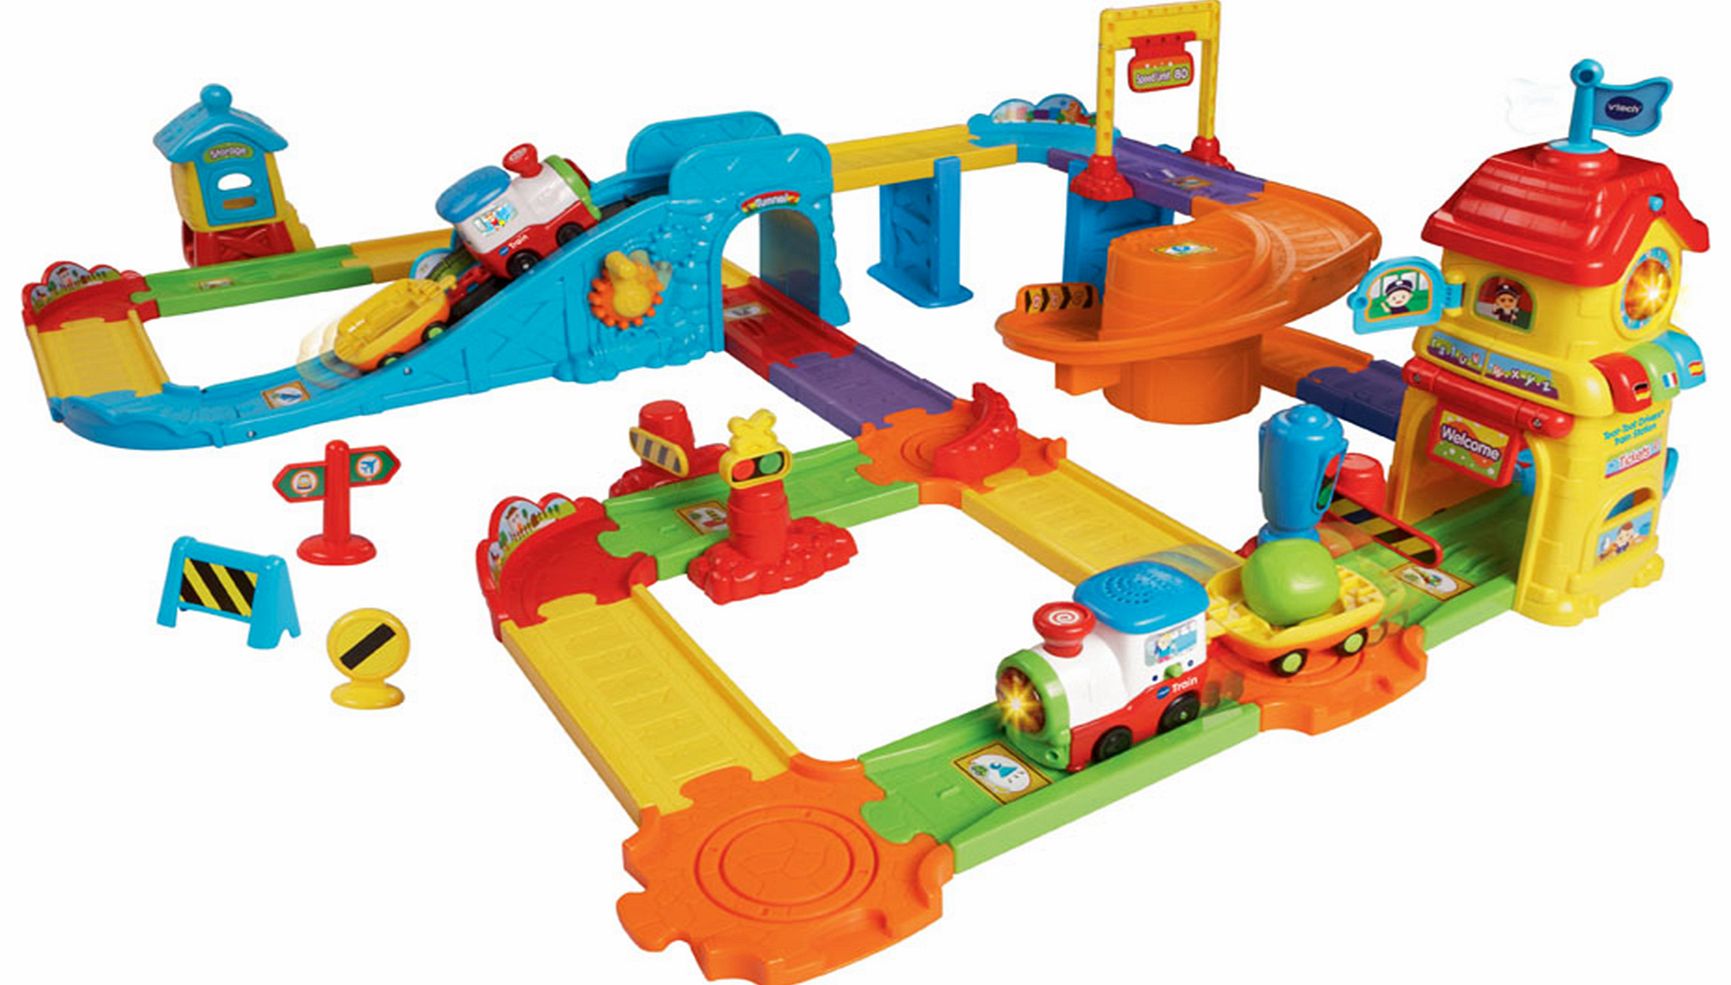 Vtech Toot-Toot Drivers Train Station